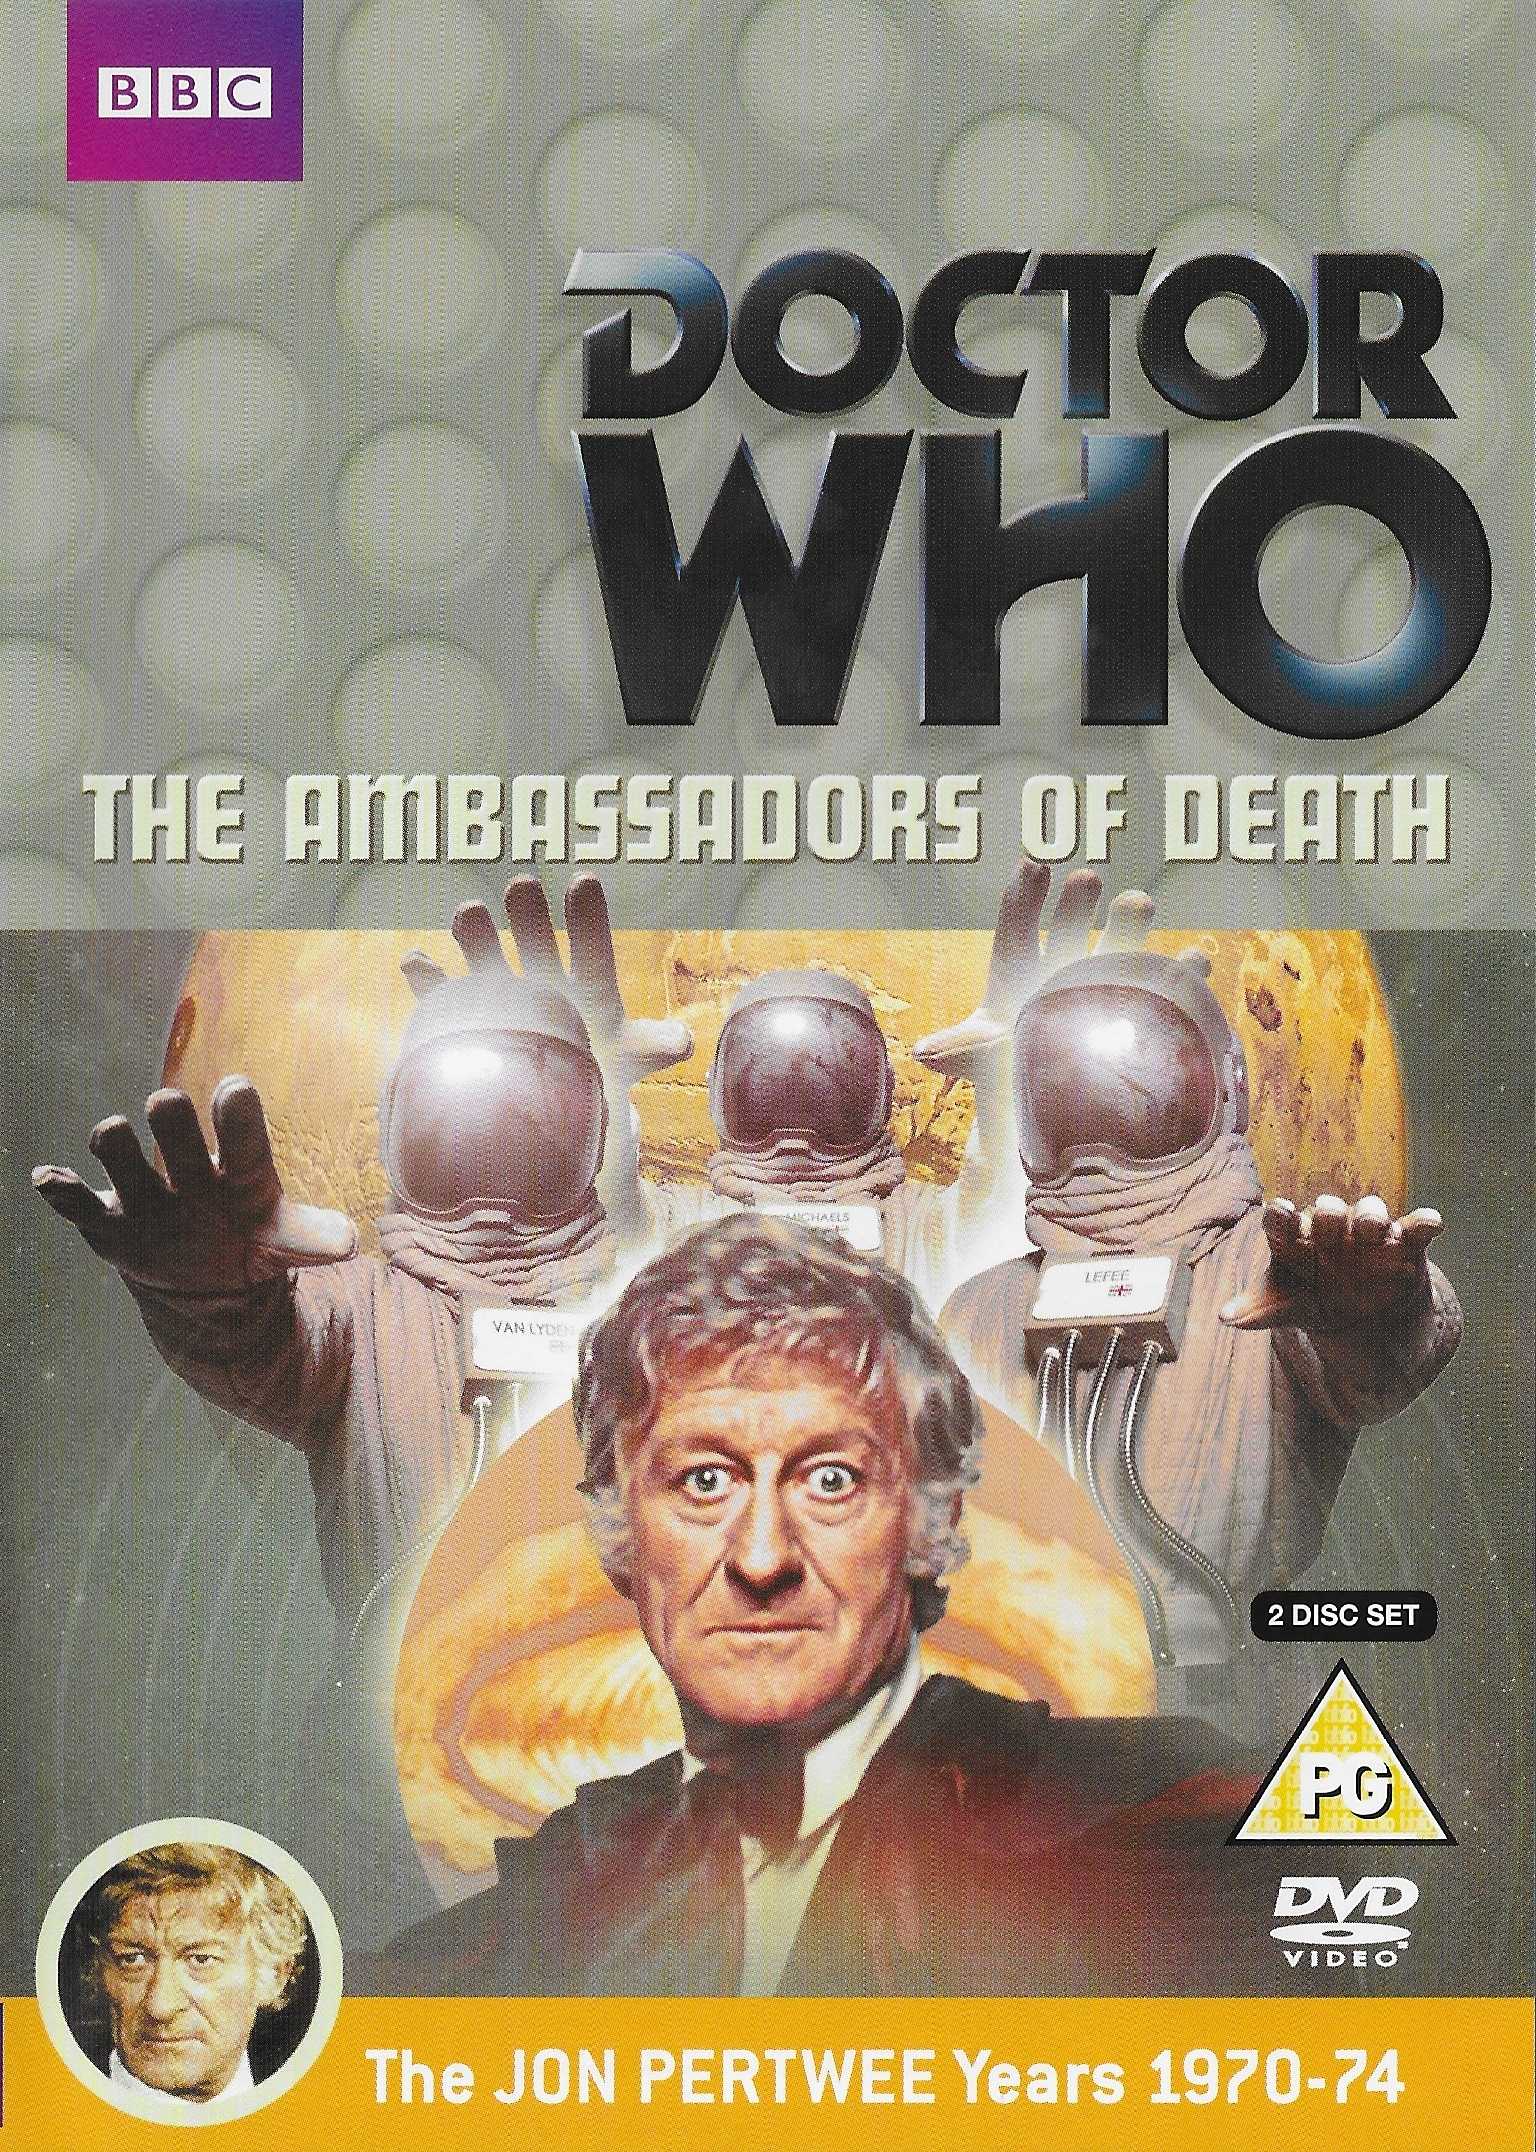 Picture of BBCDVD 3484 Doctor Who - The ambassadors of death by artist David Whitaker / Malcolm Hulke / Trevor Ray from the BBC dvds - Records and Tapes library